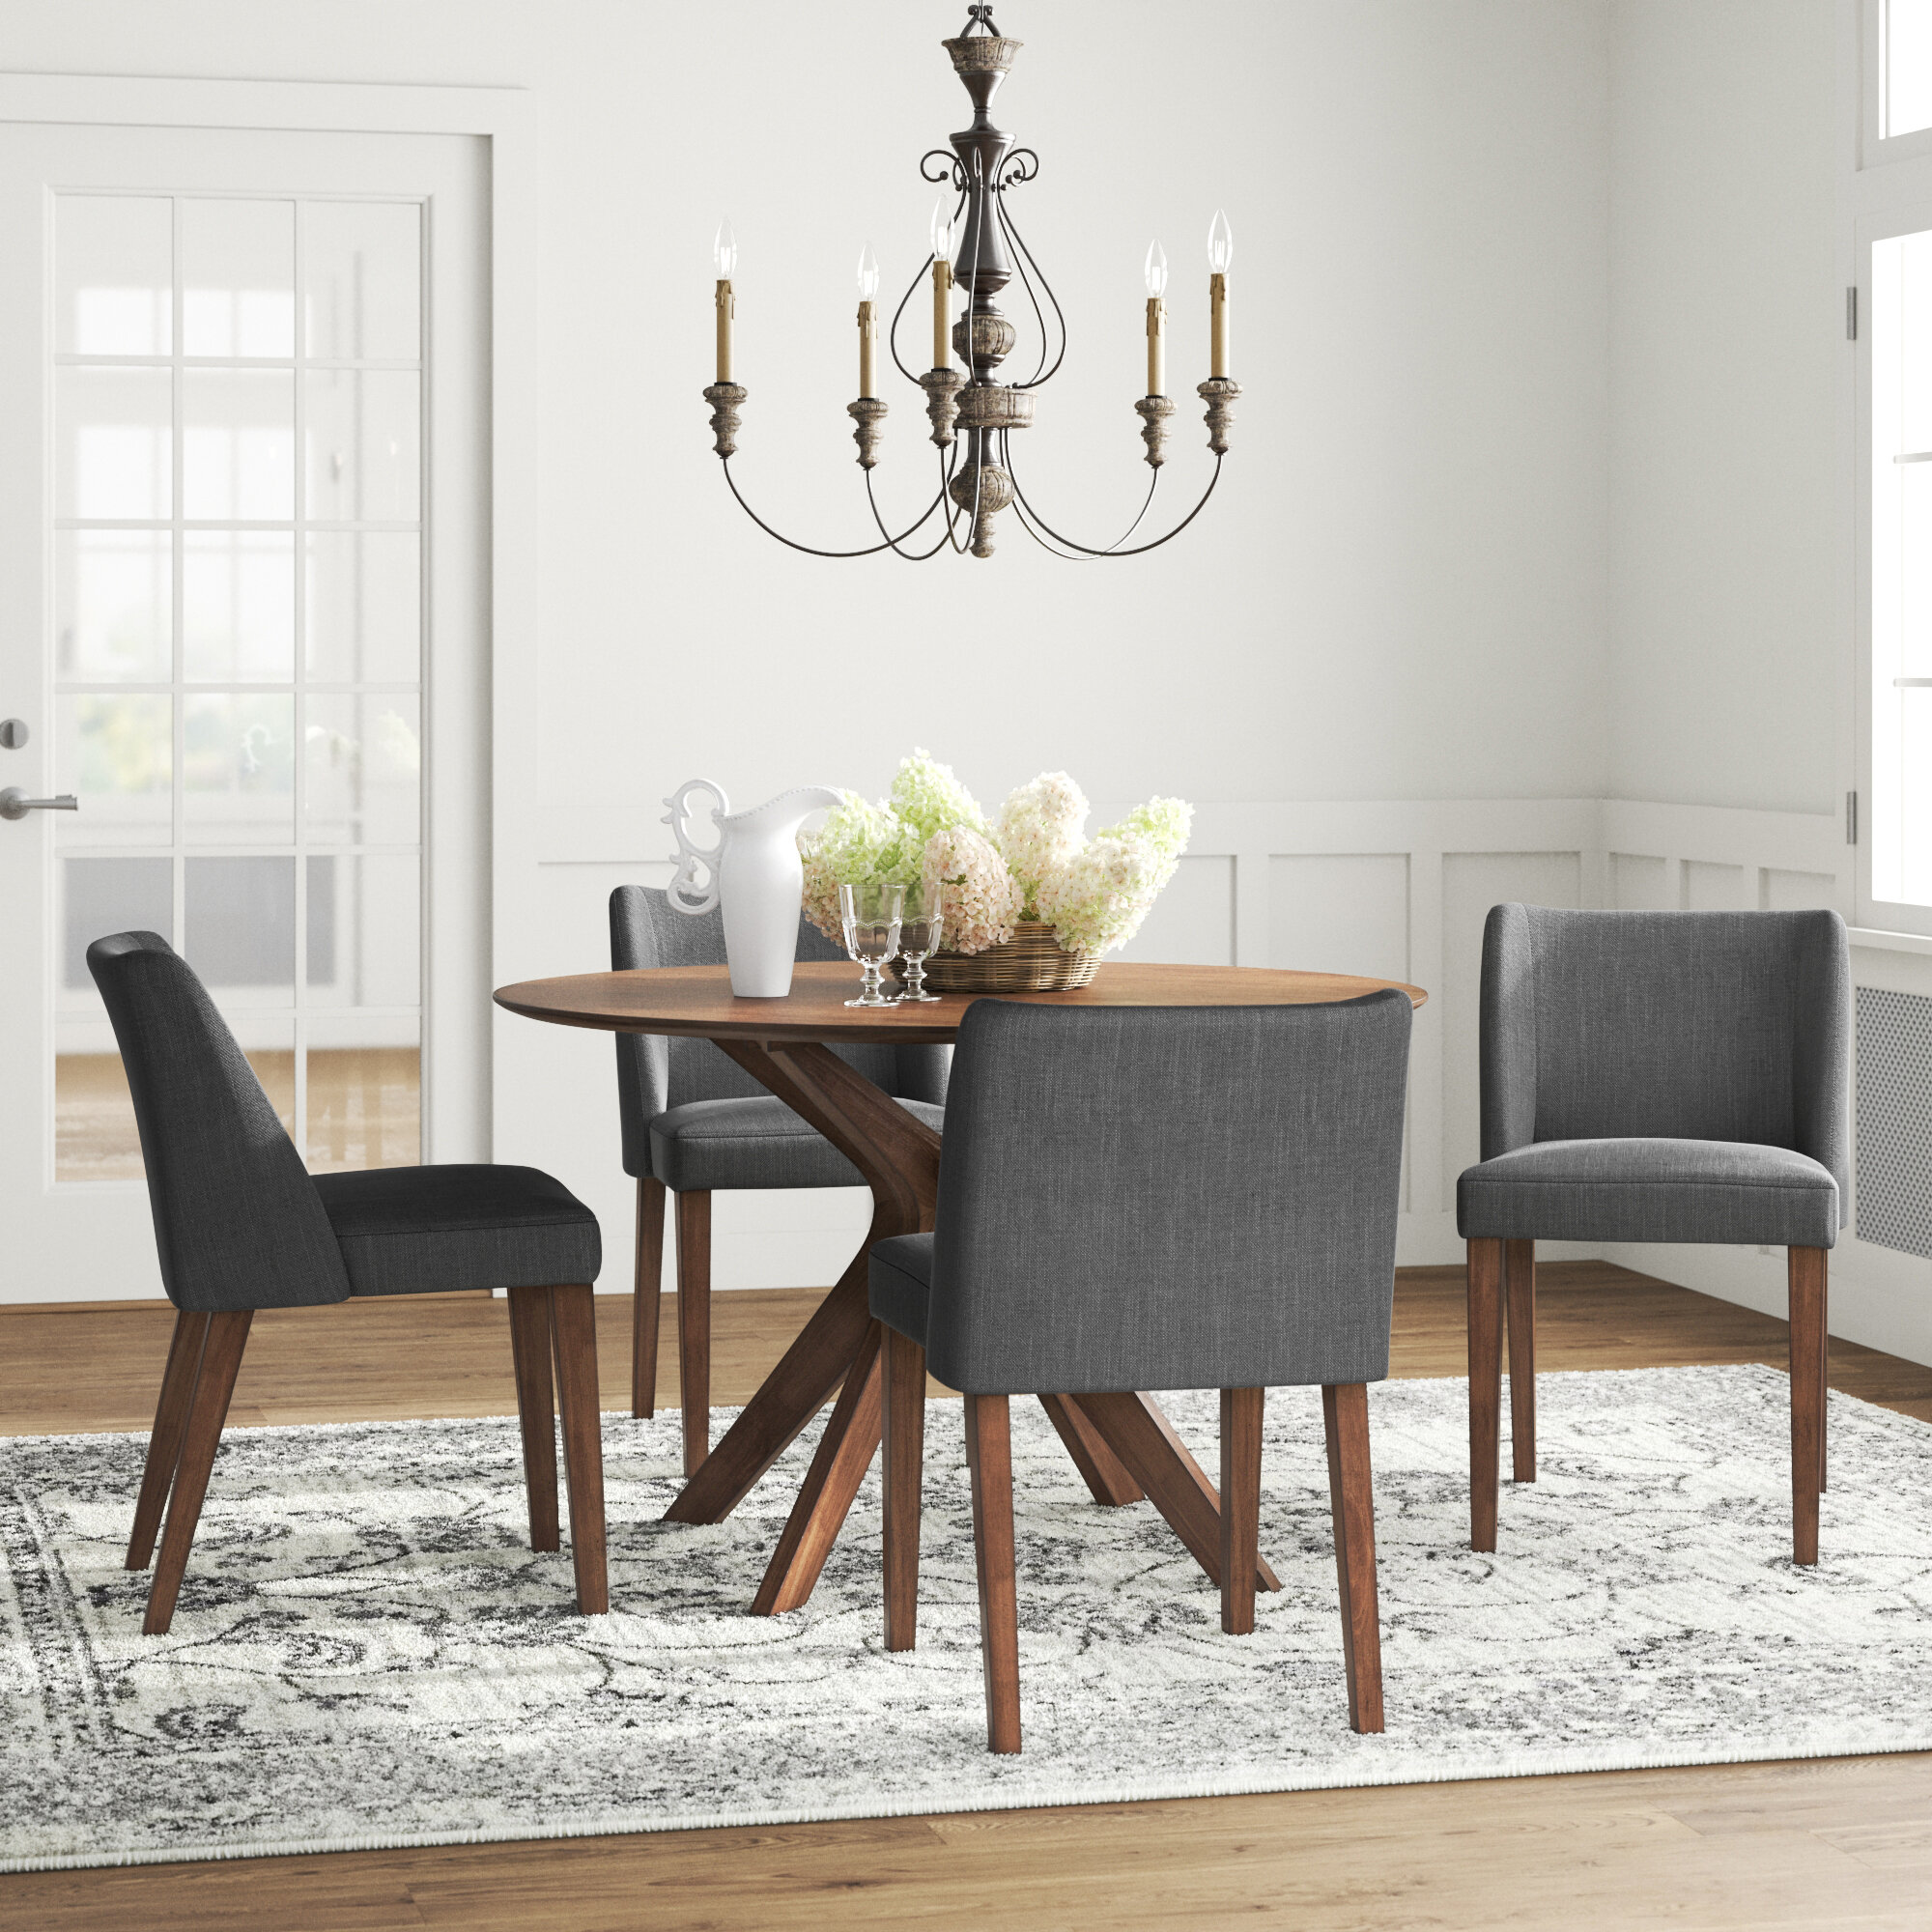 Set of 4 Dining Chairs in Dining Chairs 